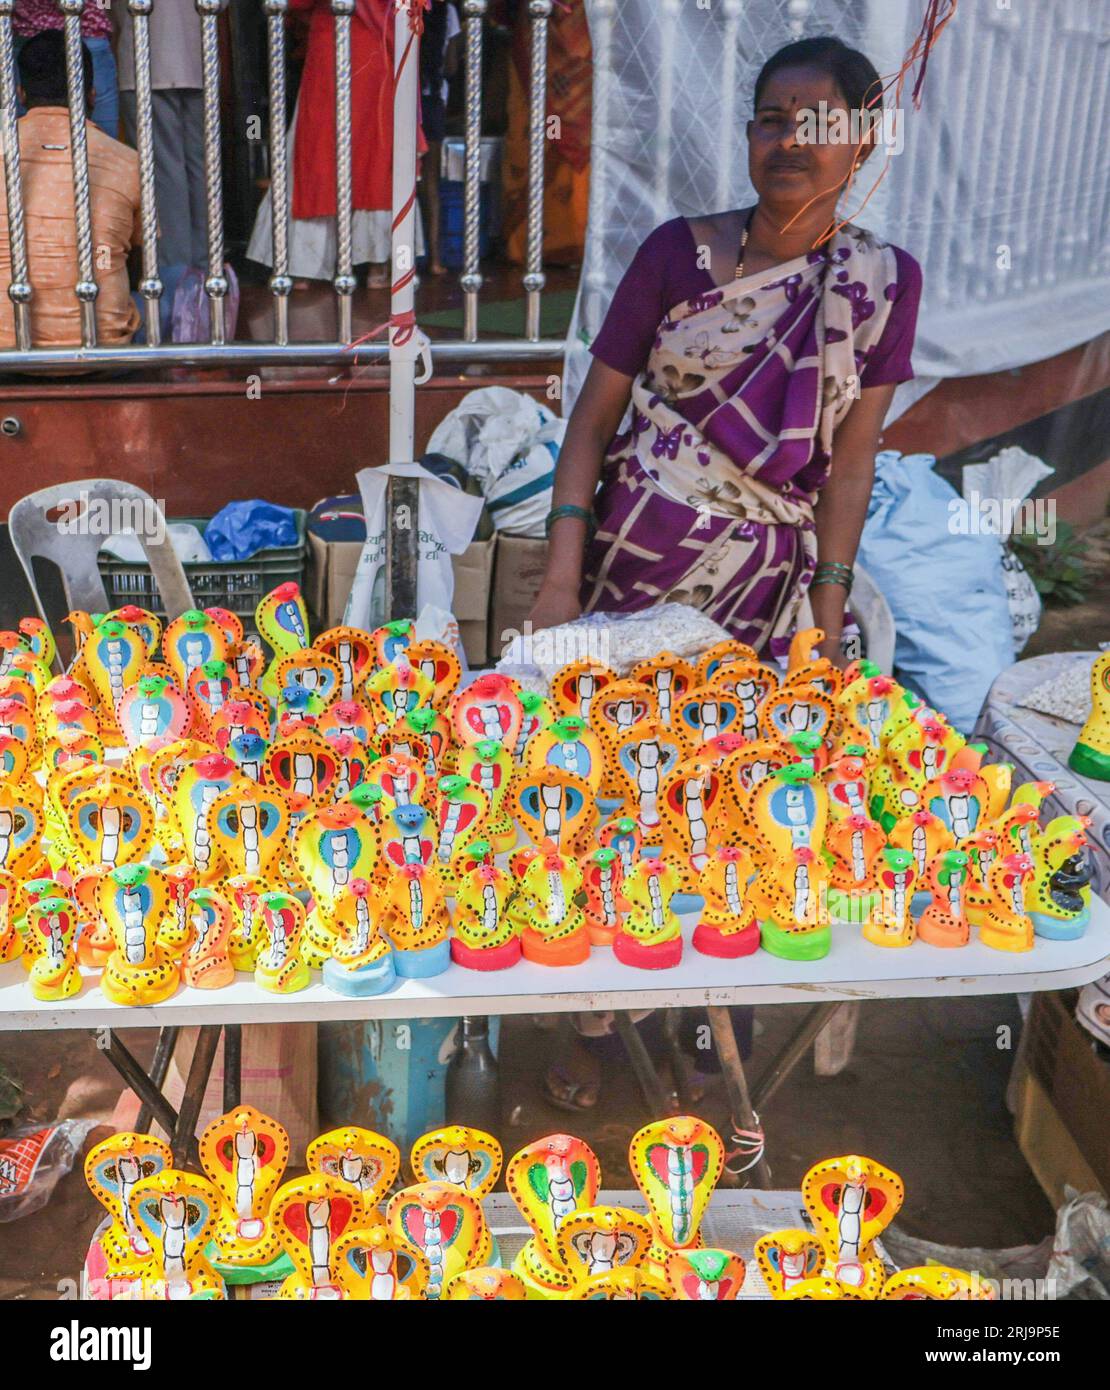 Margao, South Goa, India. 22nd Aug, 2023. Cobras efigies for sale in the Narrow passage ways selling anything imaginable in the busy and colourful market at the city of Margao, South India.Paul Quezada-Neiman/Alamy Live News Credit: Paul Quezada-Neiman/Alamy Live News Stock Photo